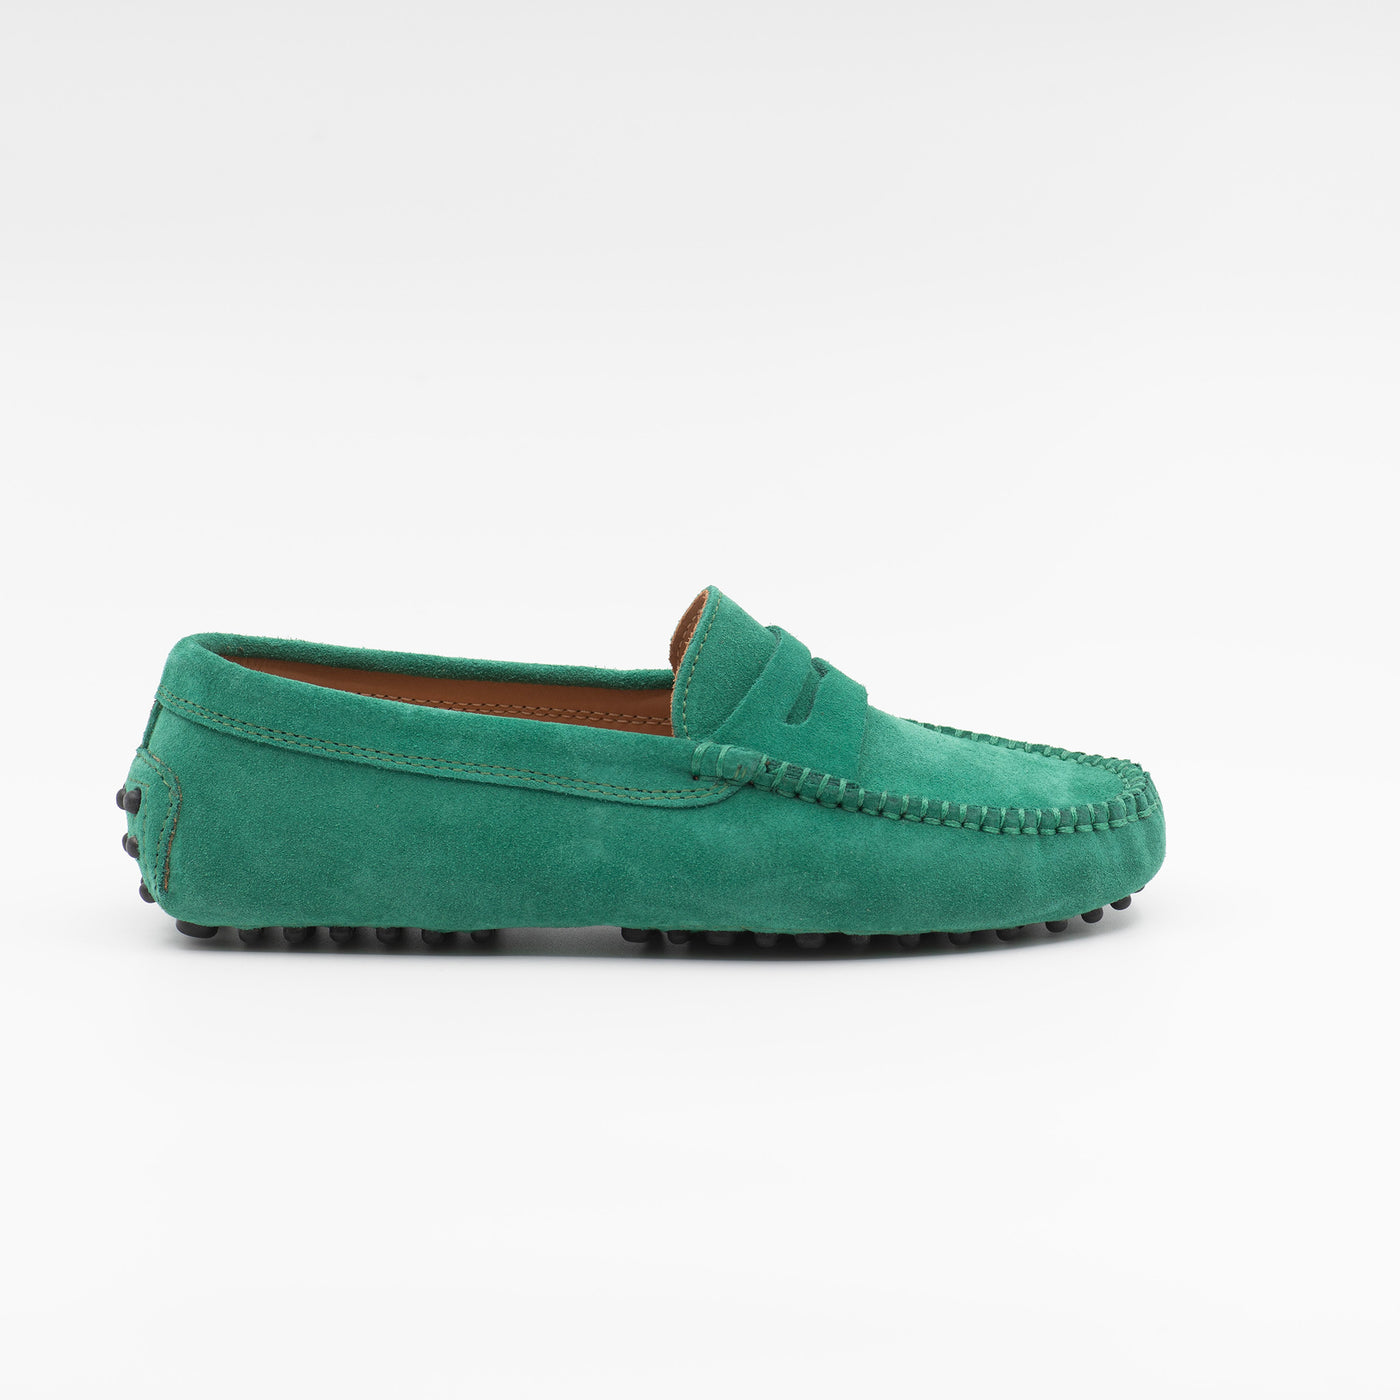 Driving Shoe in Green Suede